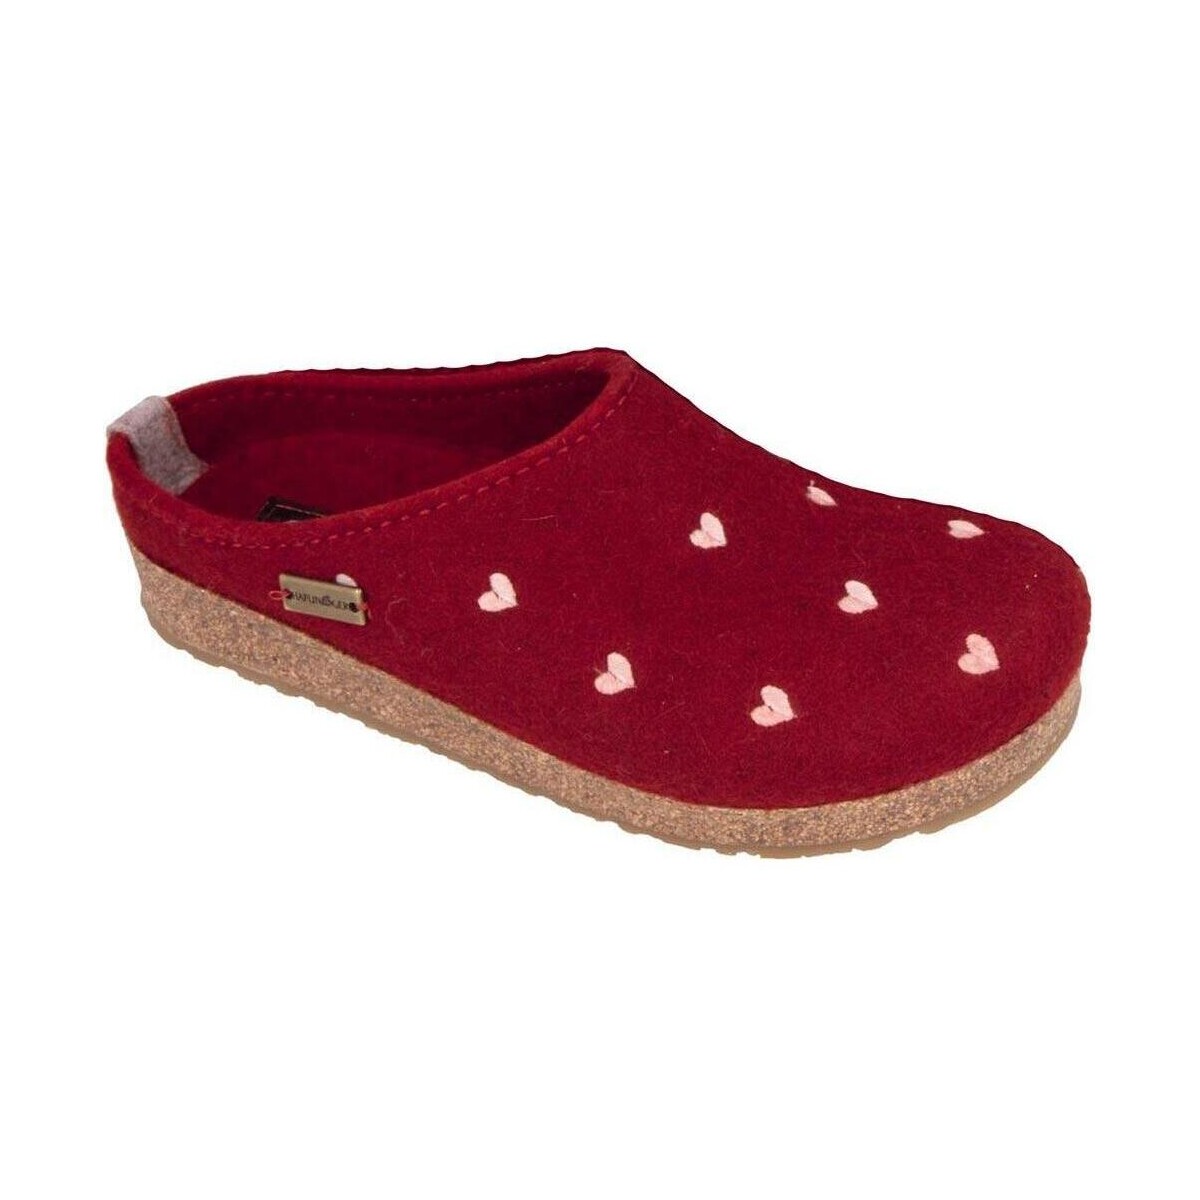 Zapatos Mujer Pantuflas Haflinger HF-GRIZLY-CUOred-D Rojo